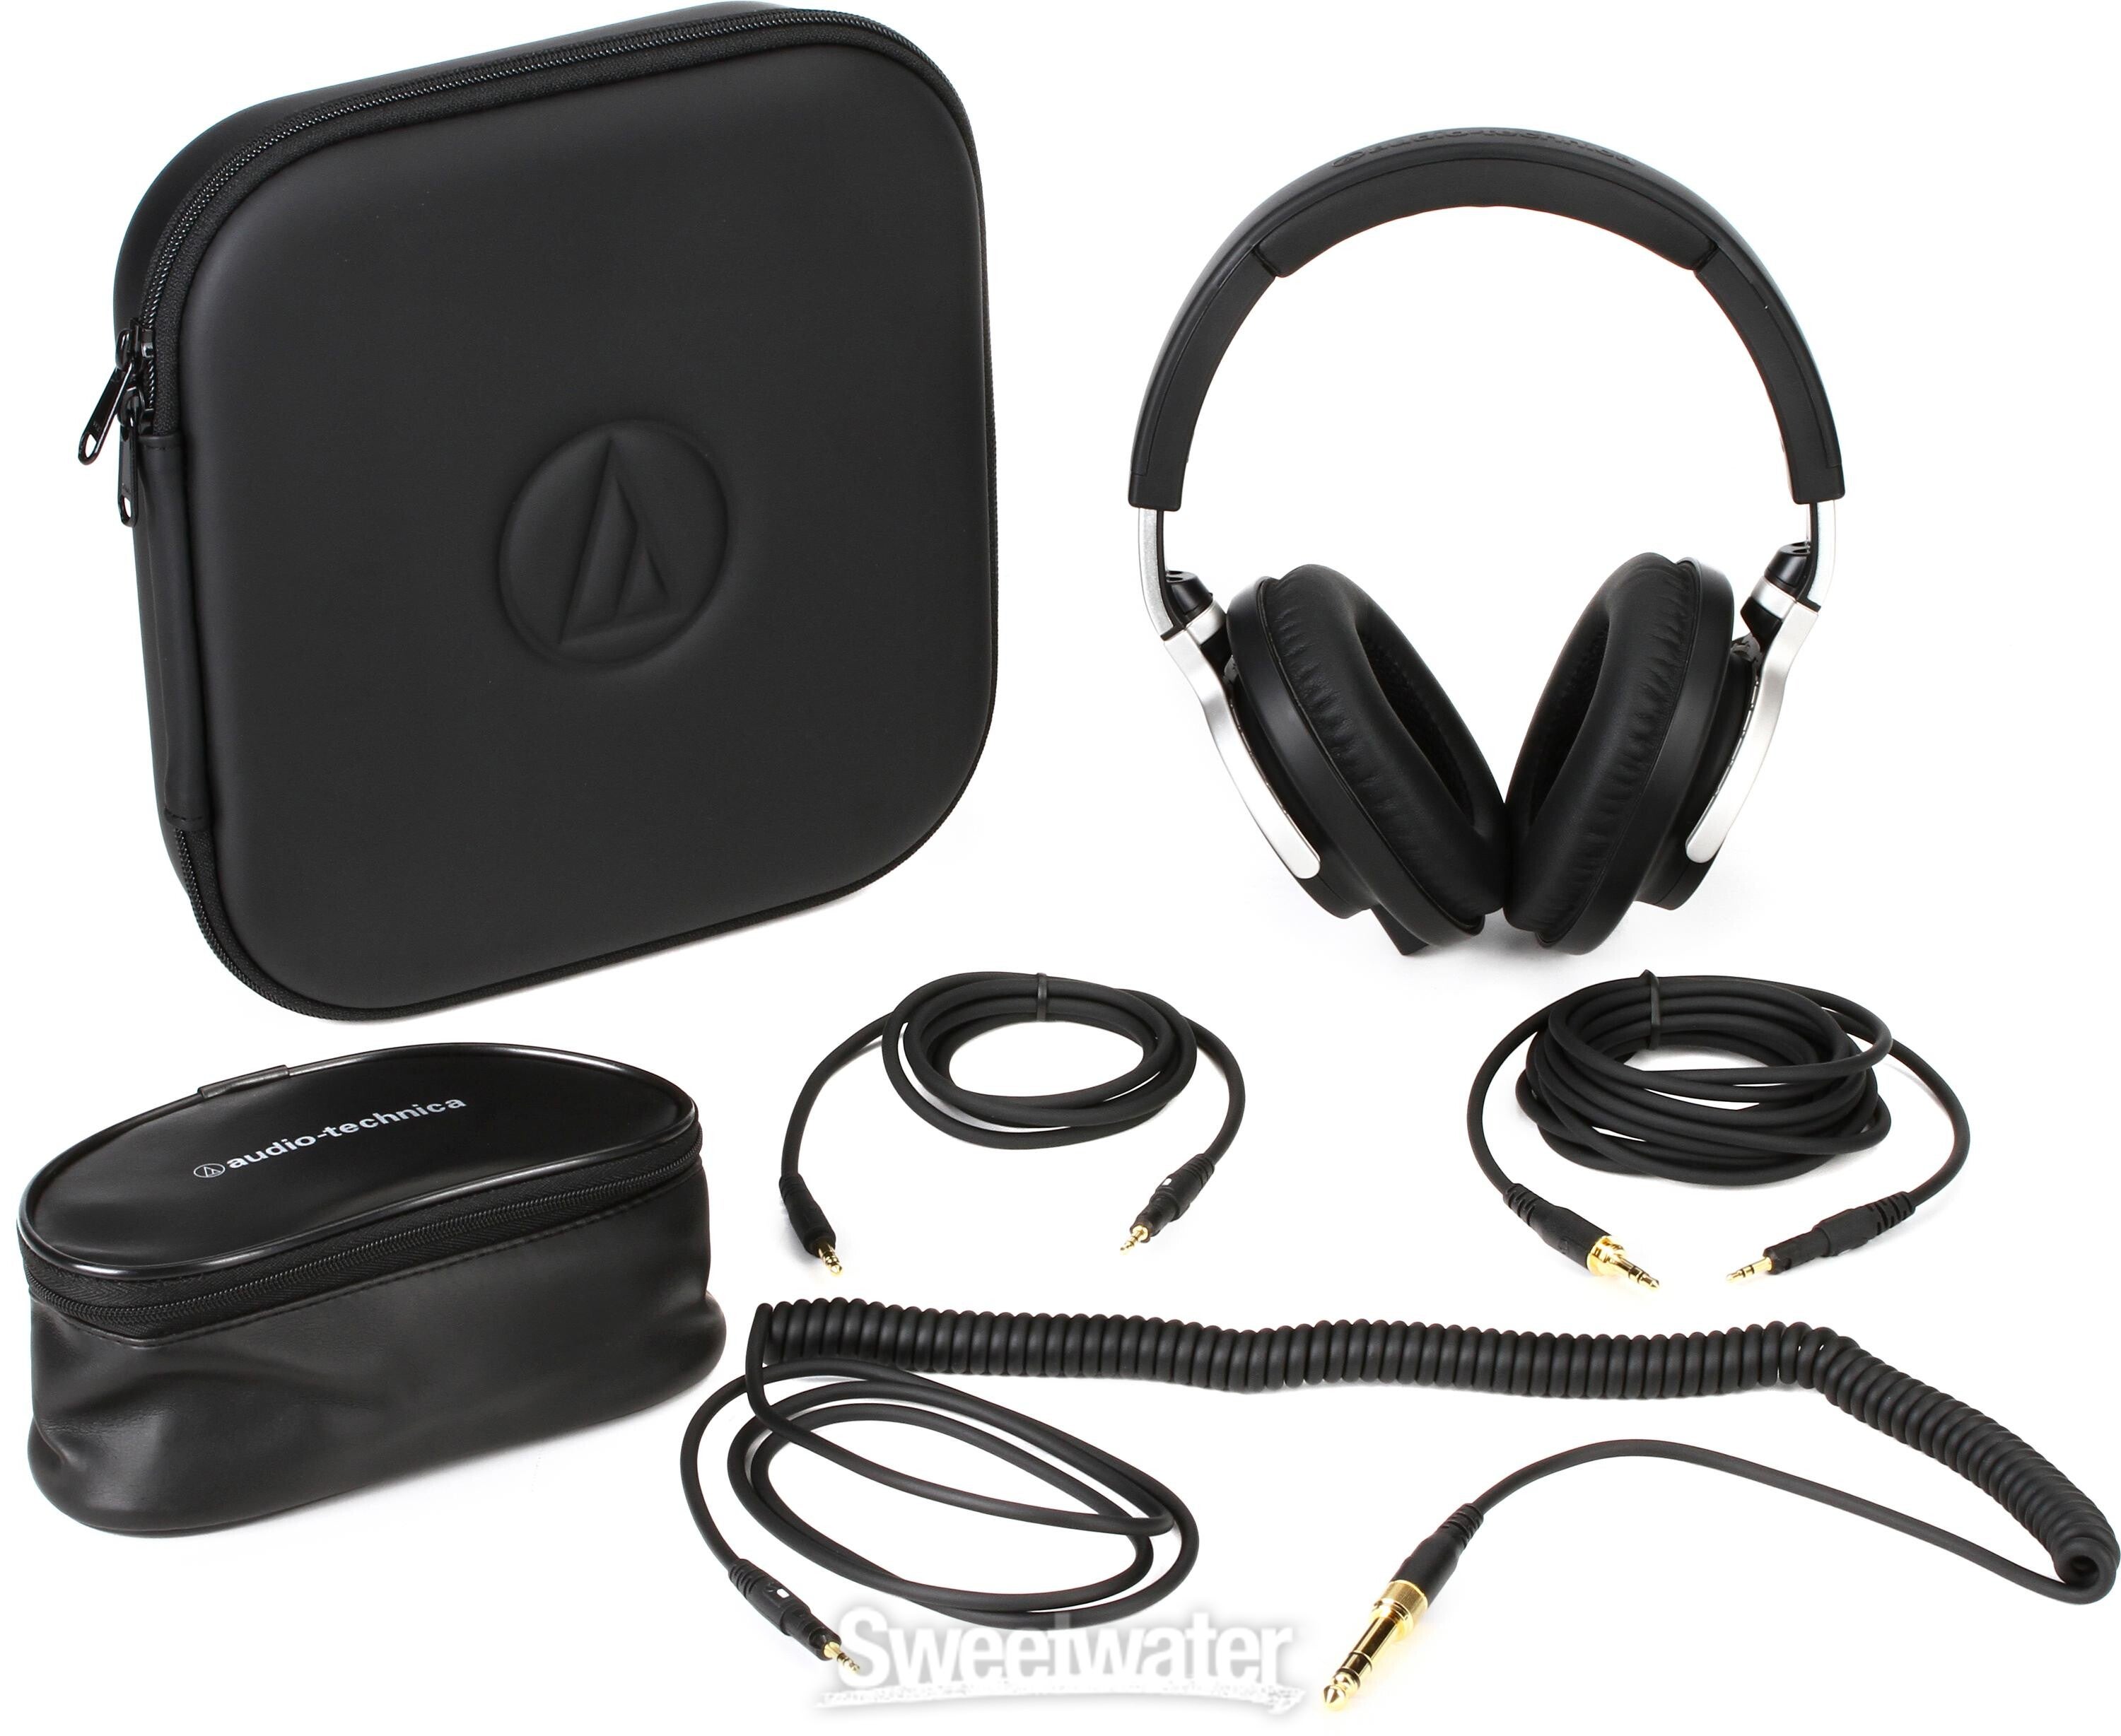 Audio-Technica ATH-M70x Closed-back Monitoring Headphones | Sweetwater